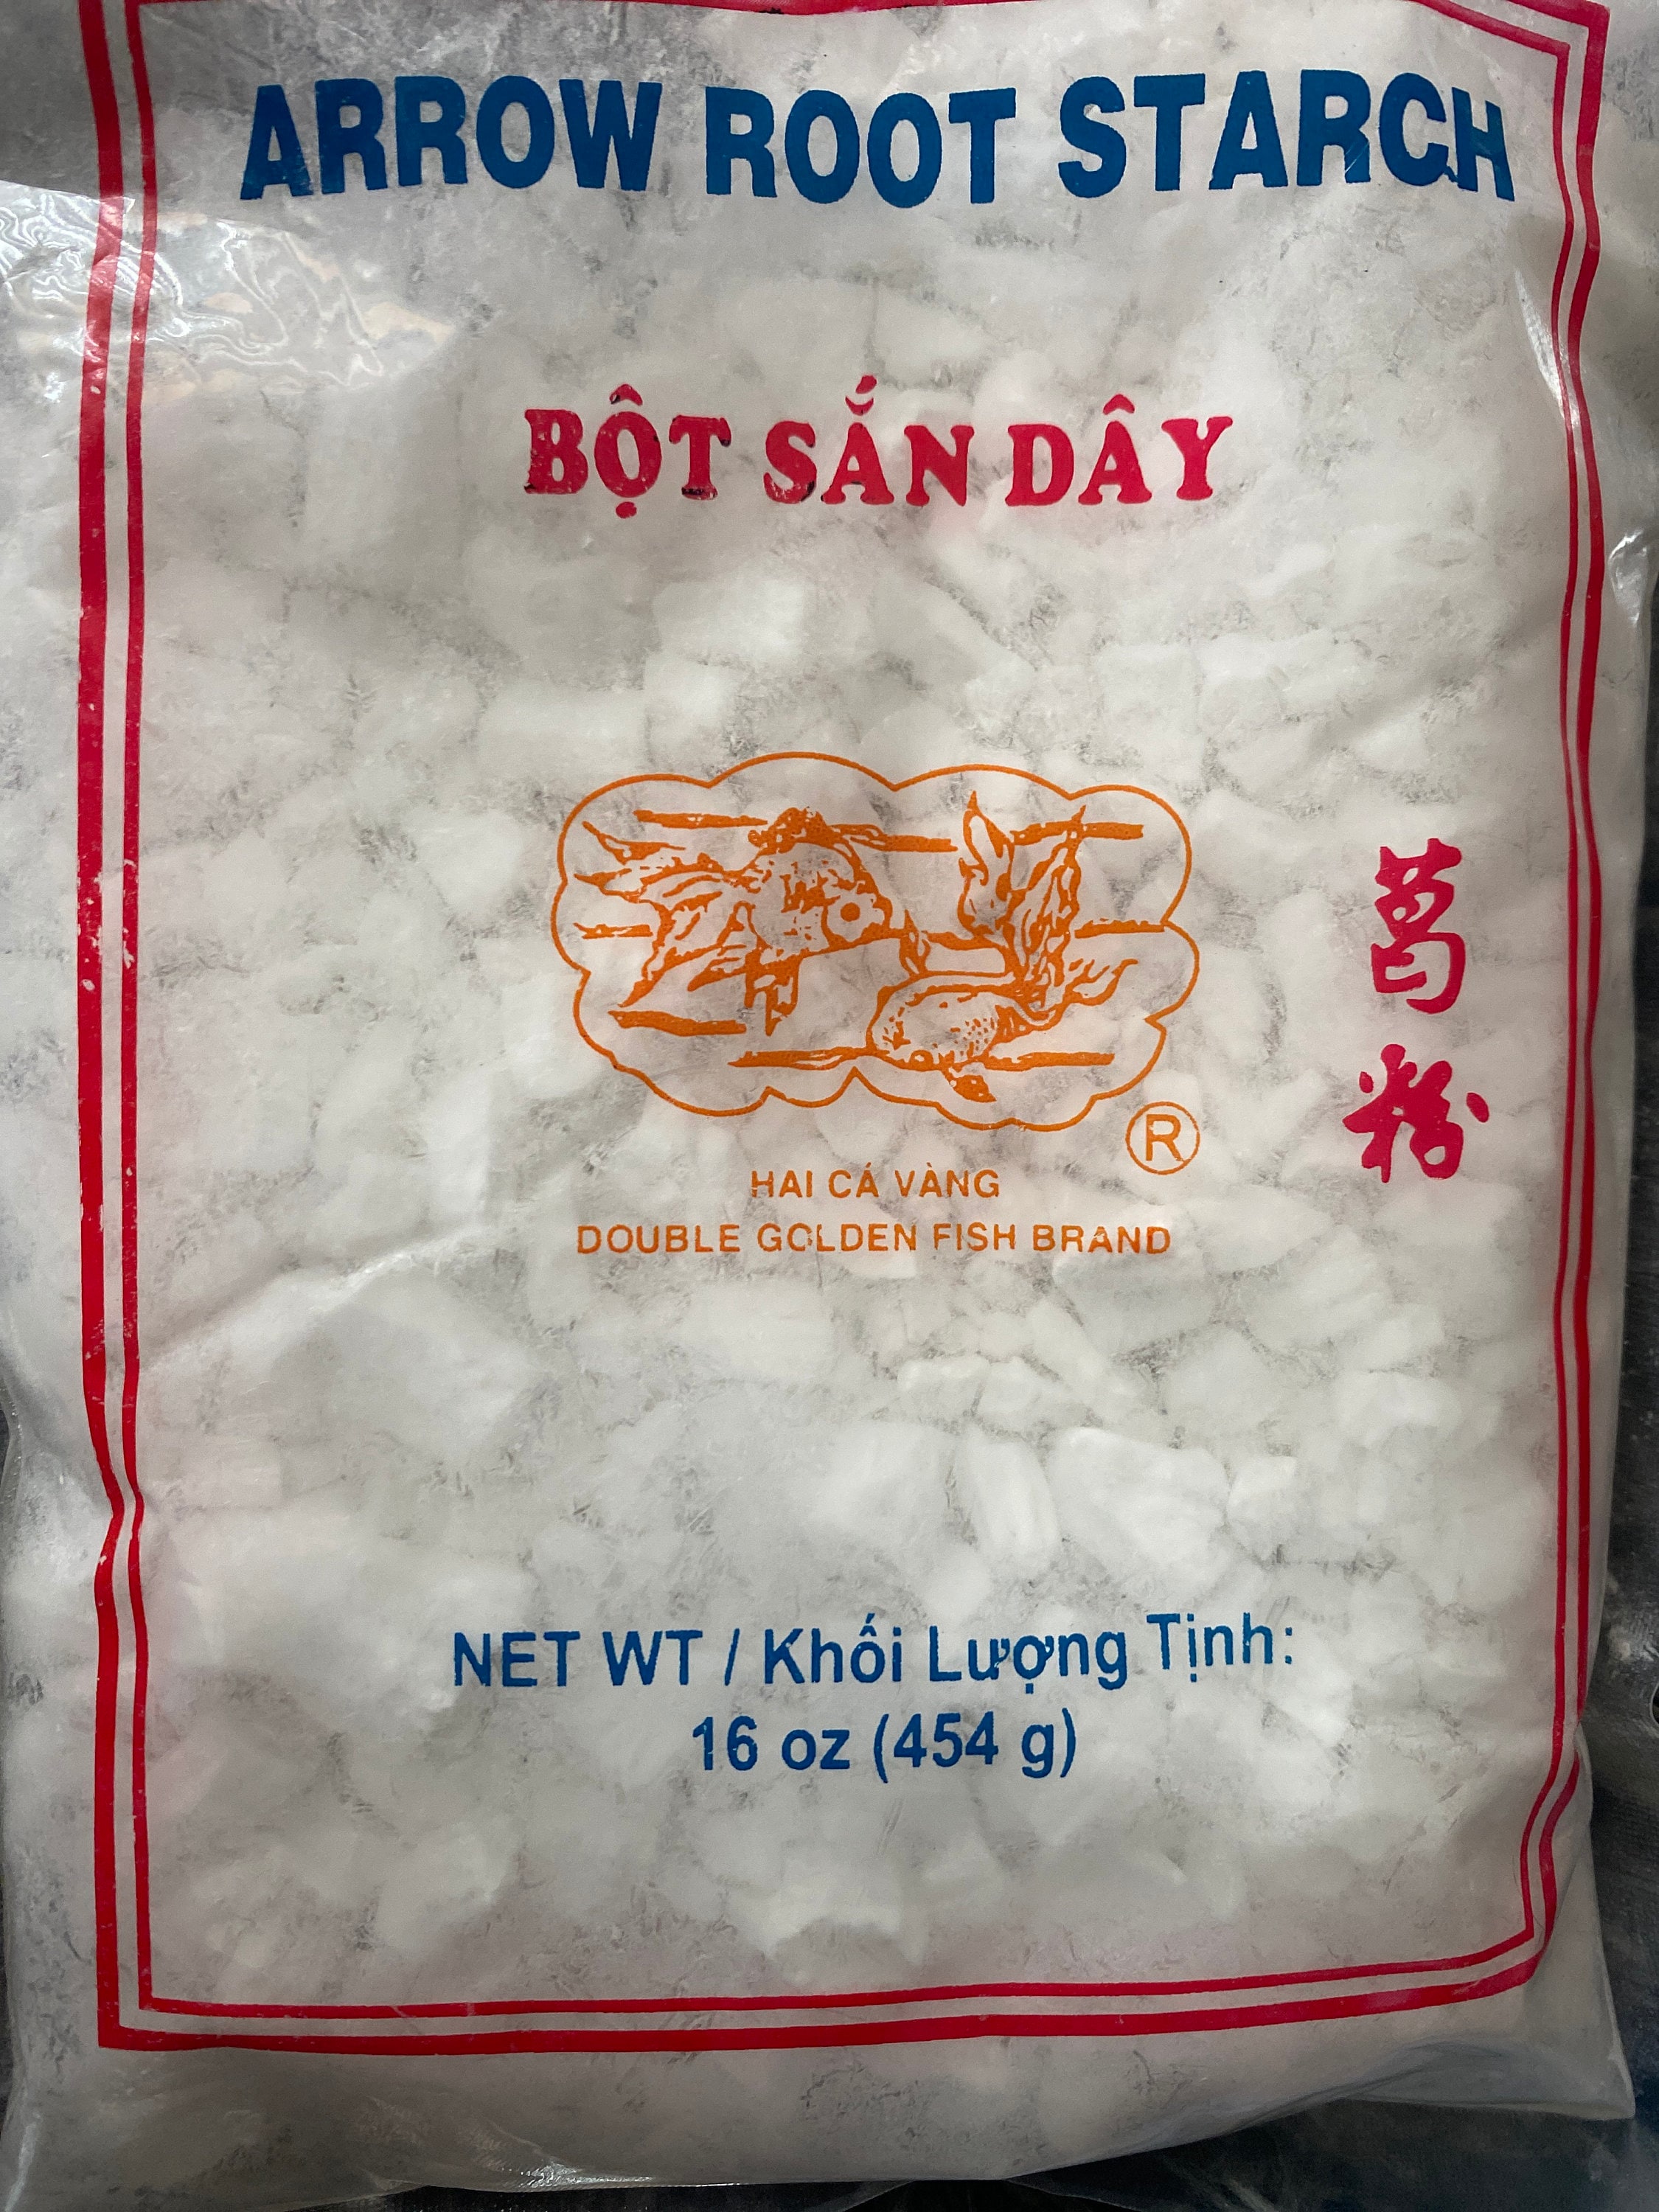  Twin Dolphin Bot San Day Arrowroot Flour Chunks, 10.5 Ounce  (300g) Reclosable Jars [Pack of 2] : Grocery & Gourmet Food